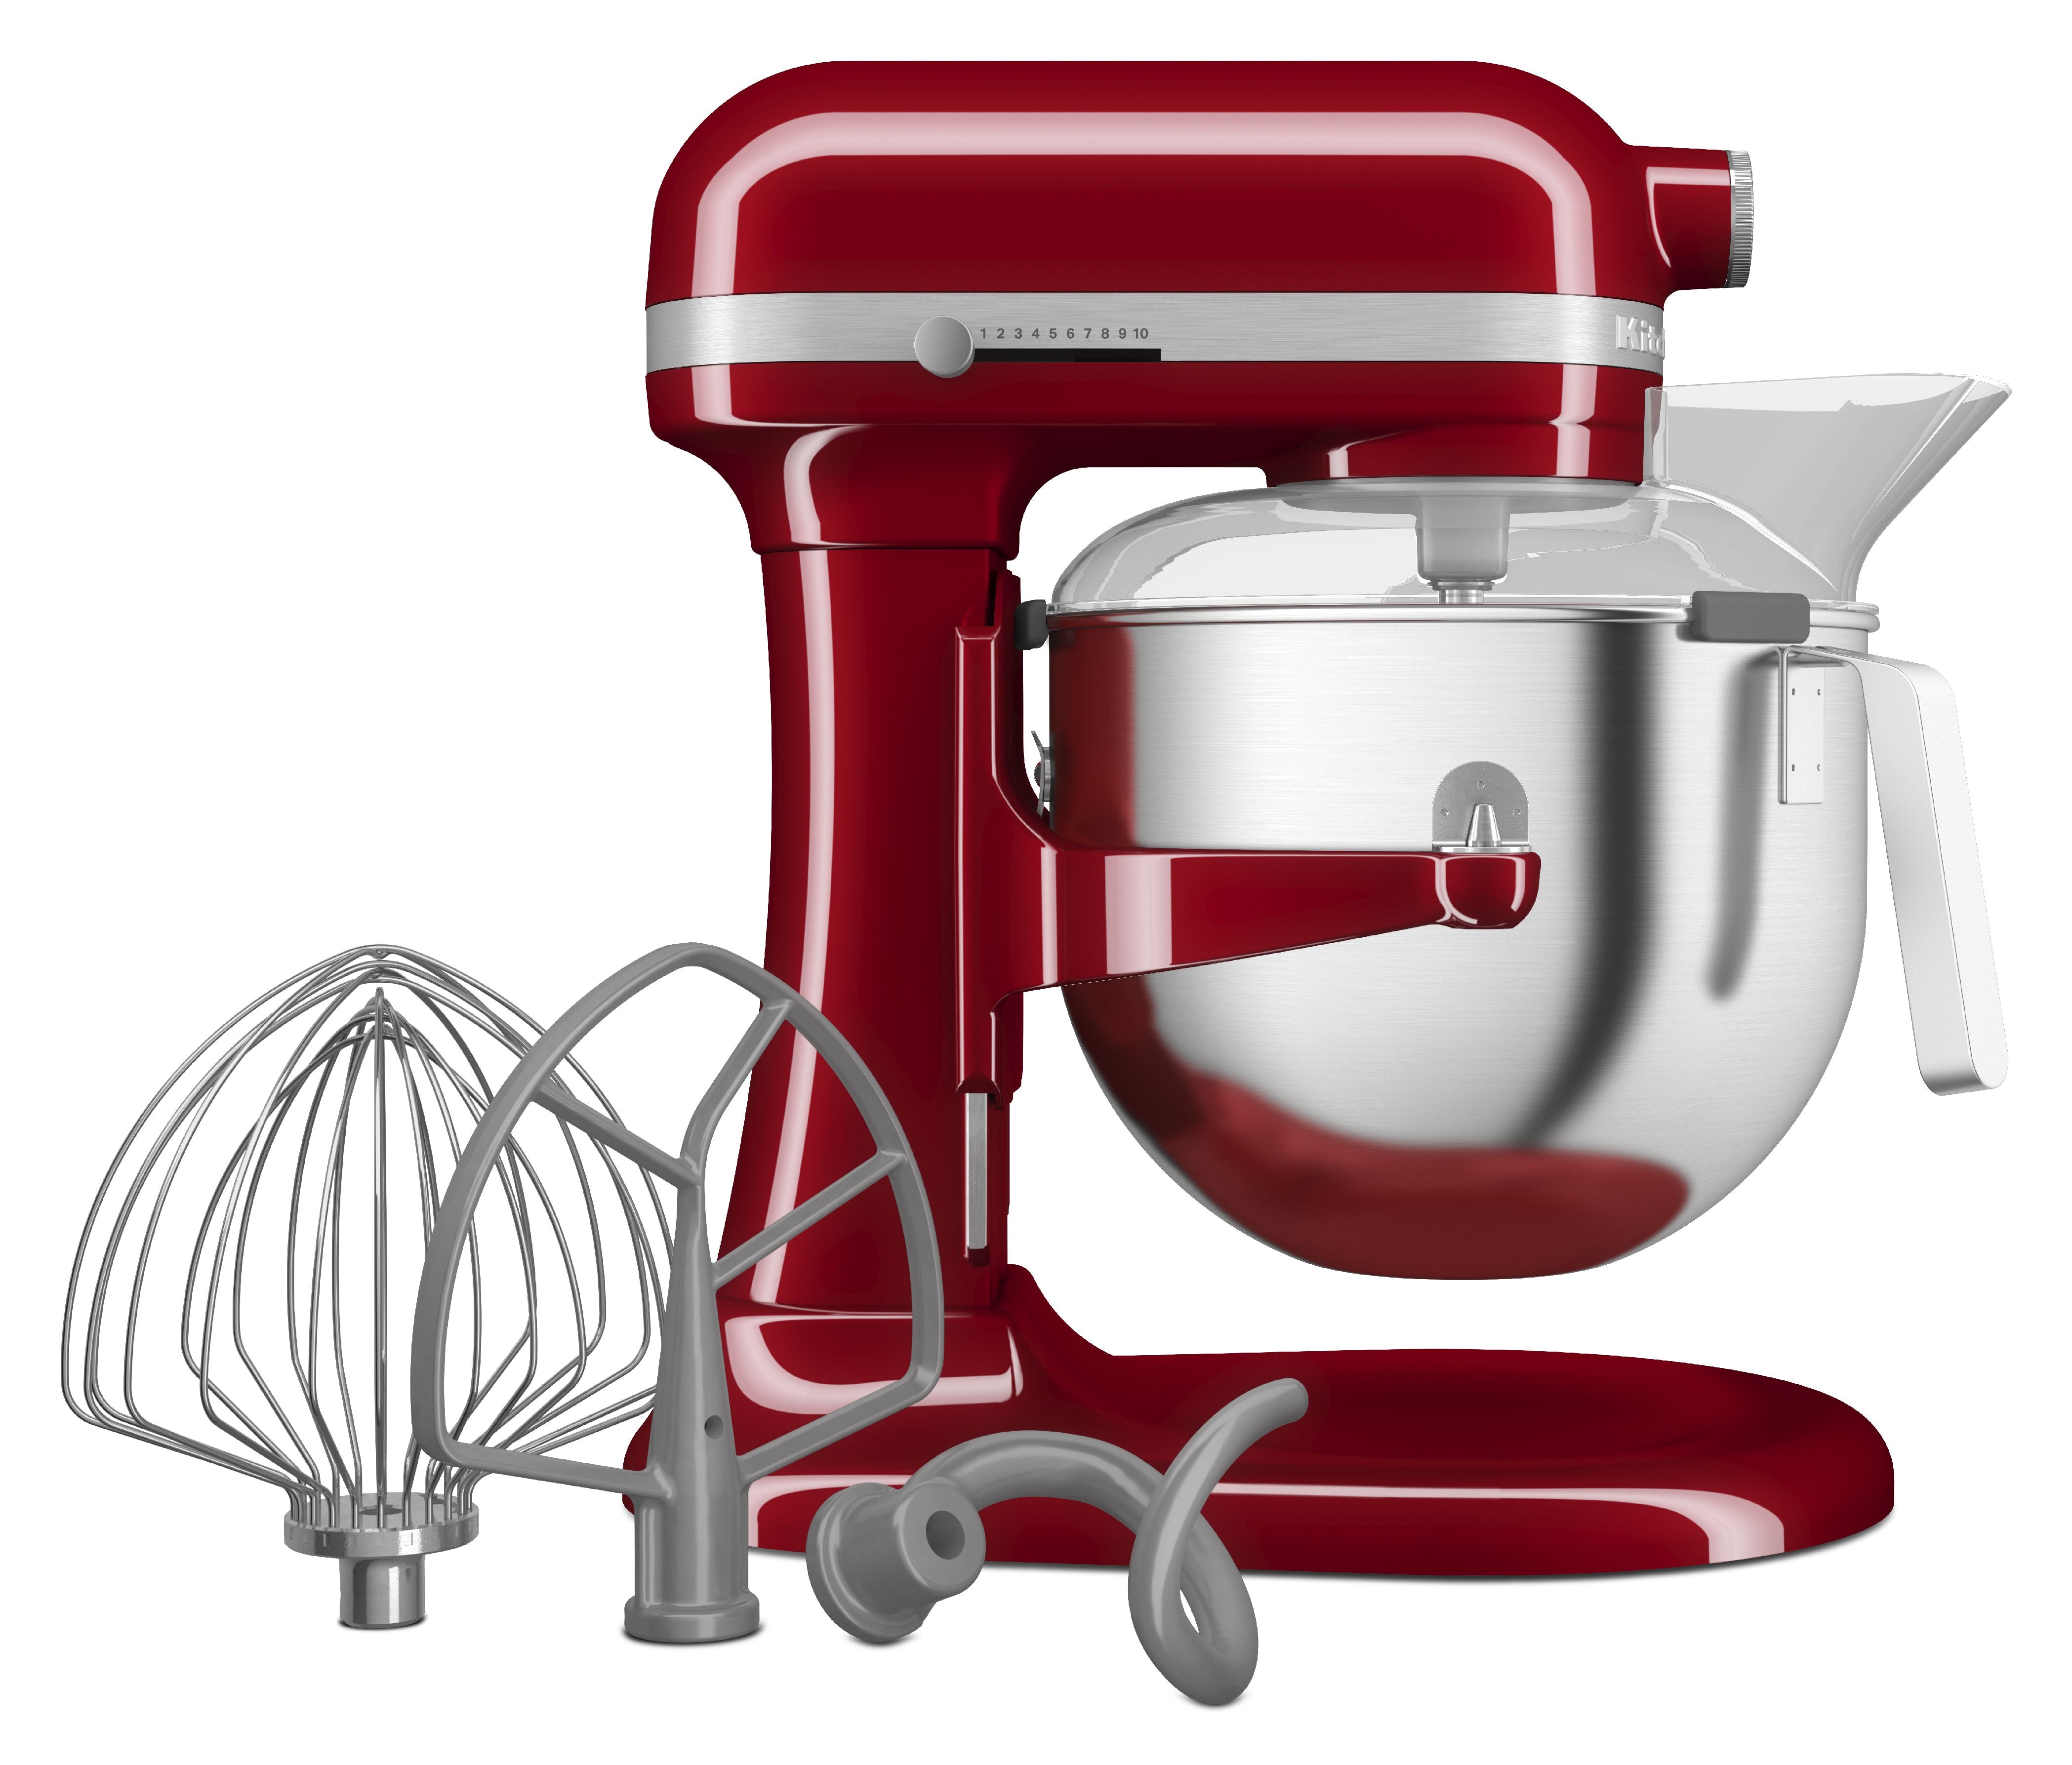 Kitchen Aid Heavy Duty Bowl Lift Stand Mixer 6.6 L, Empired Red